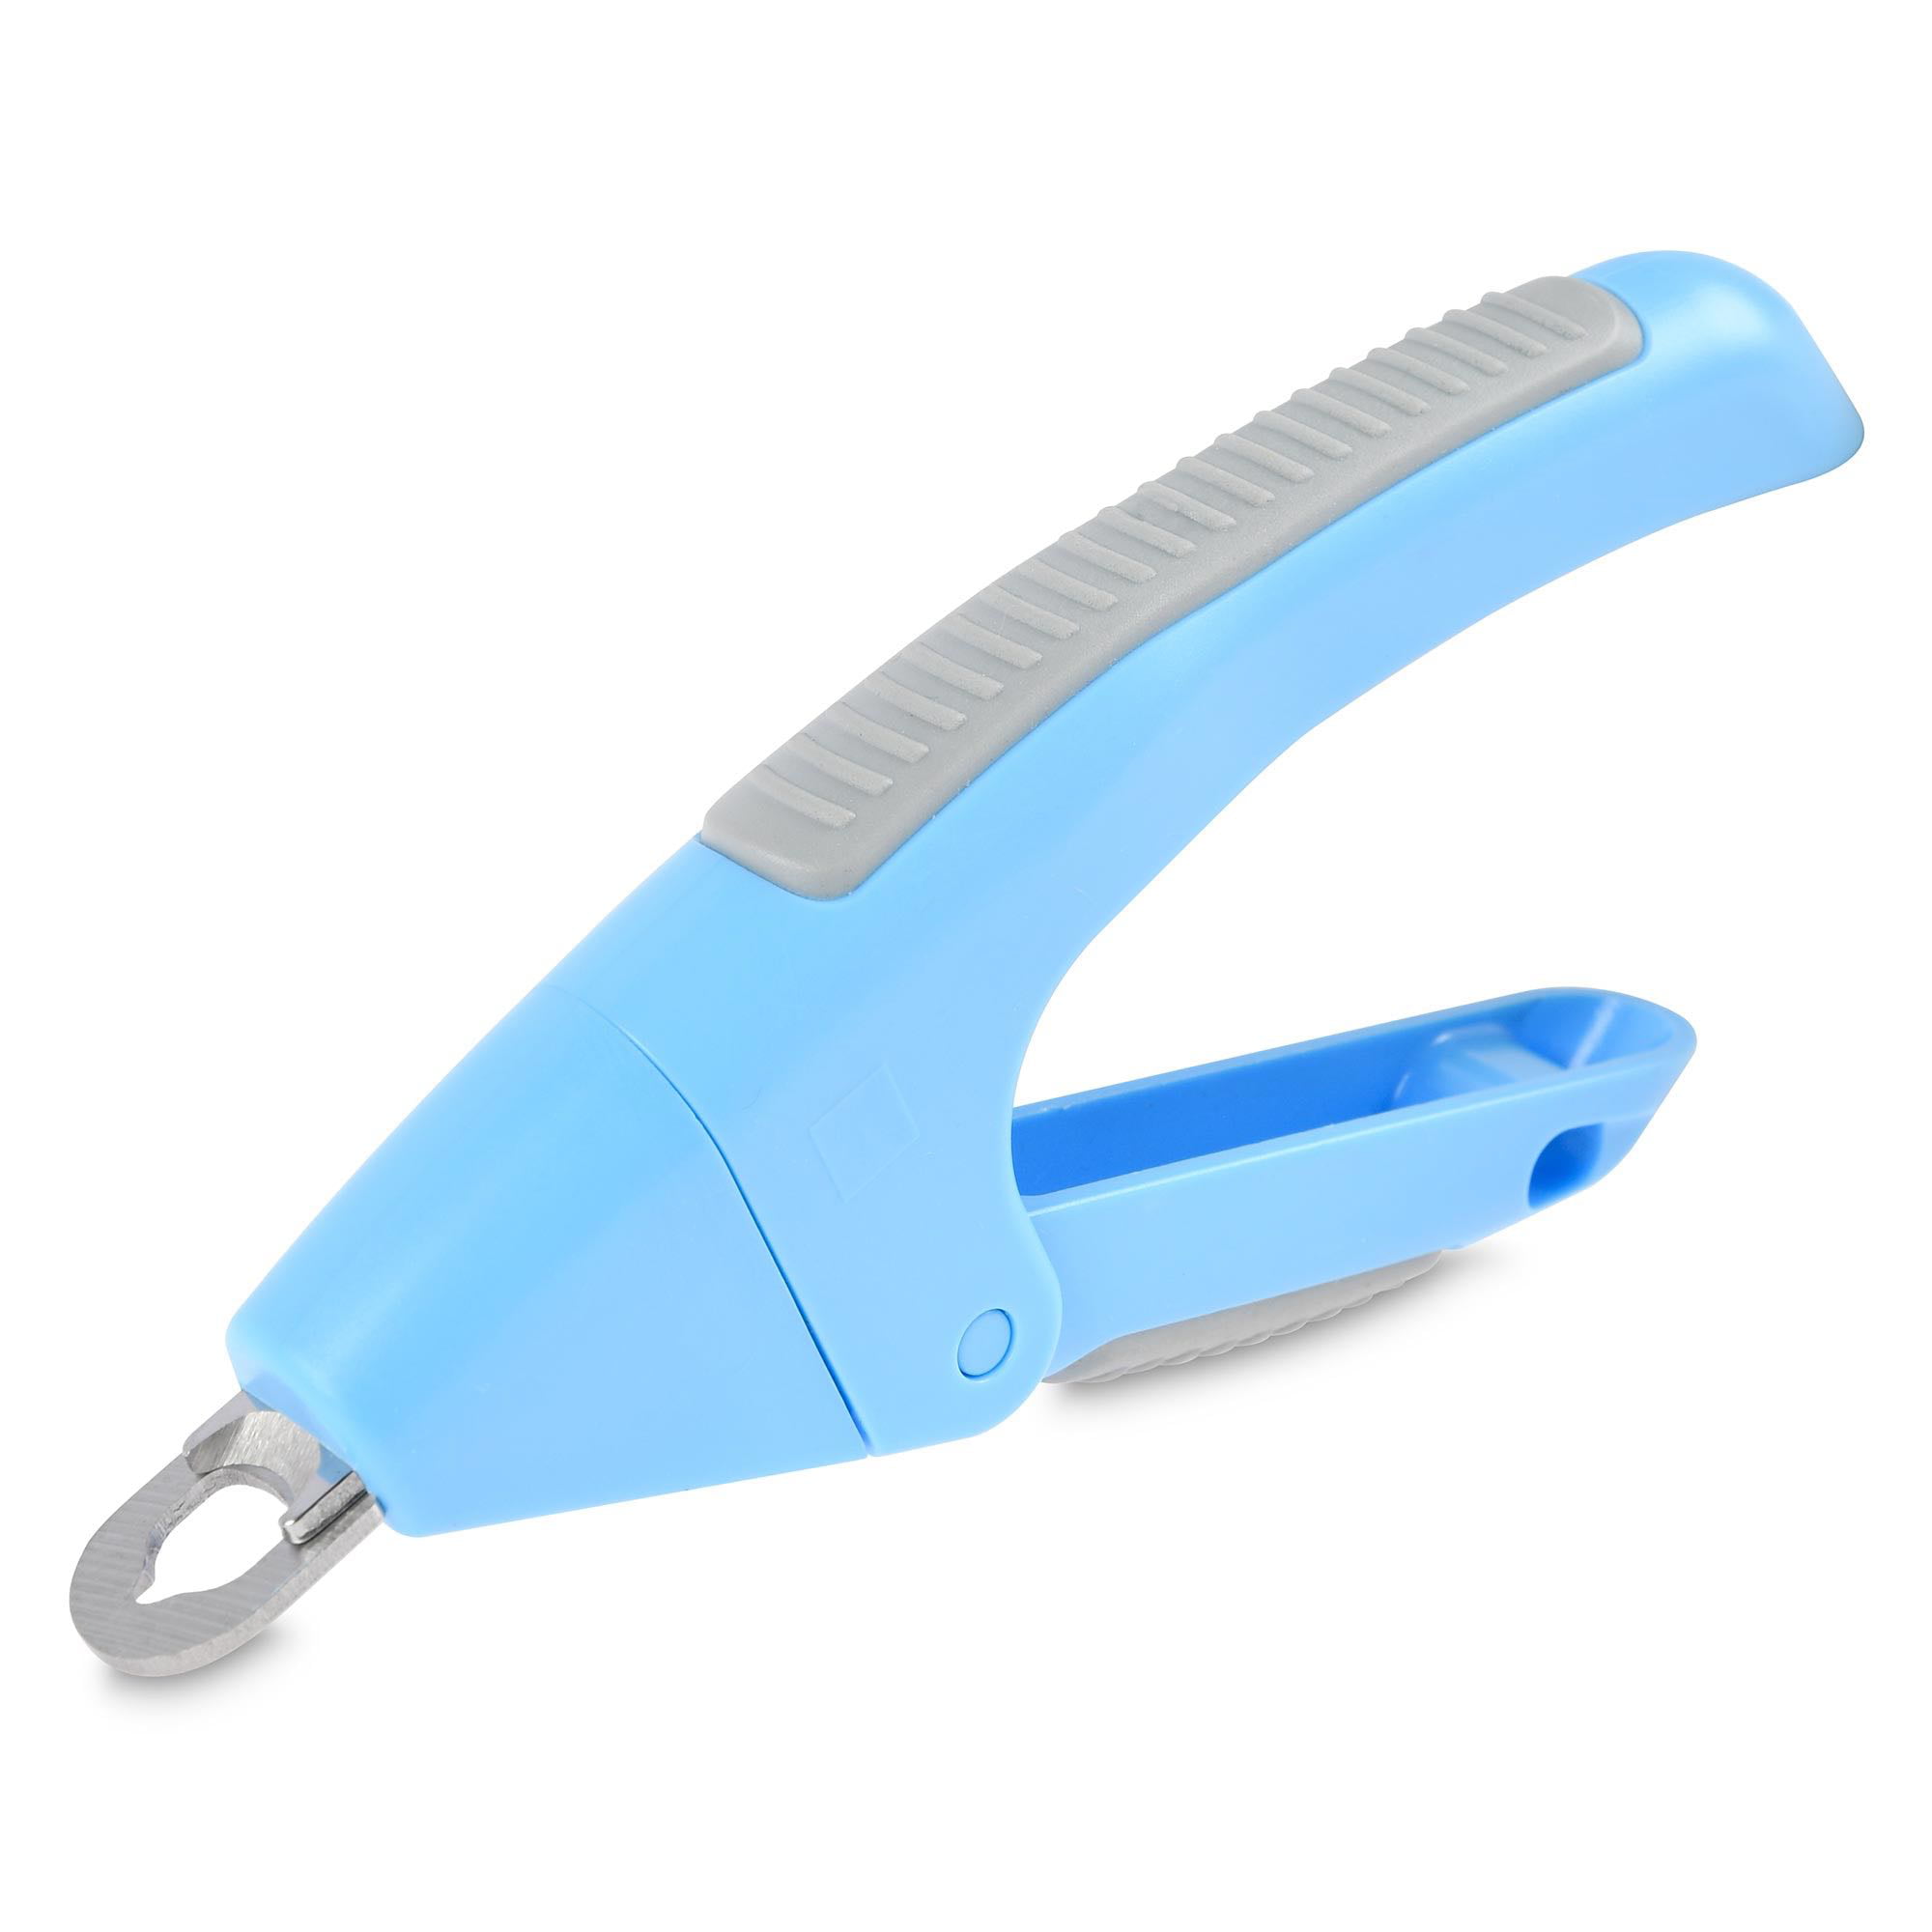 small dog nail clippers